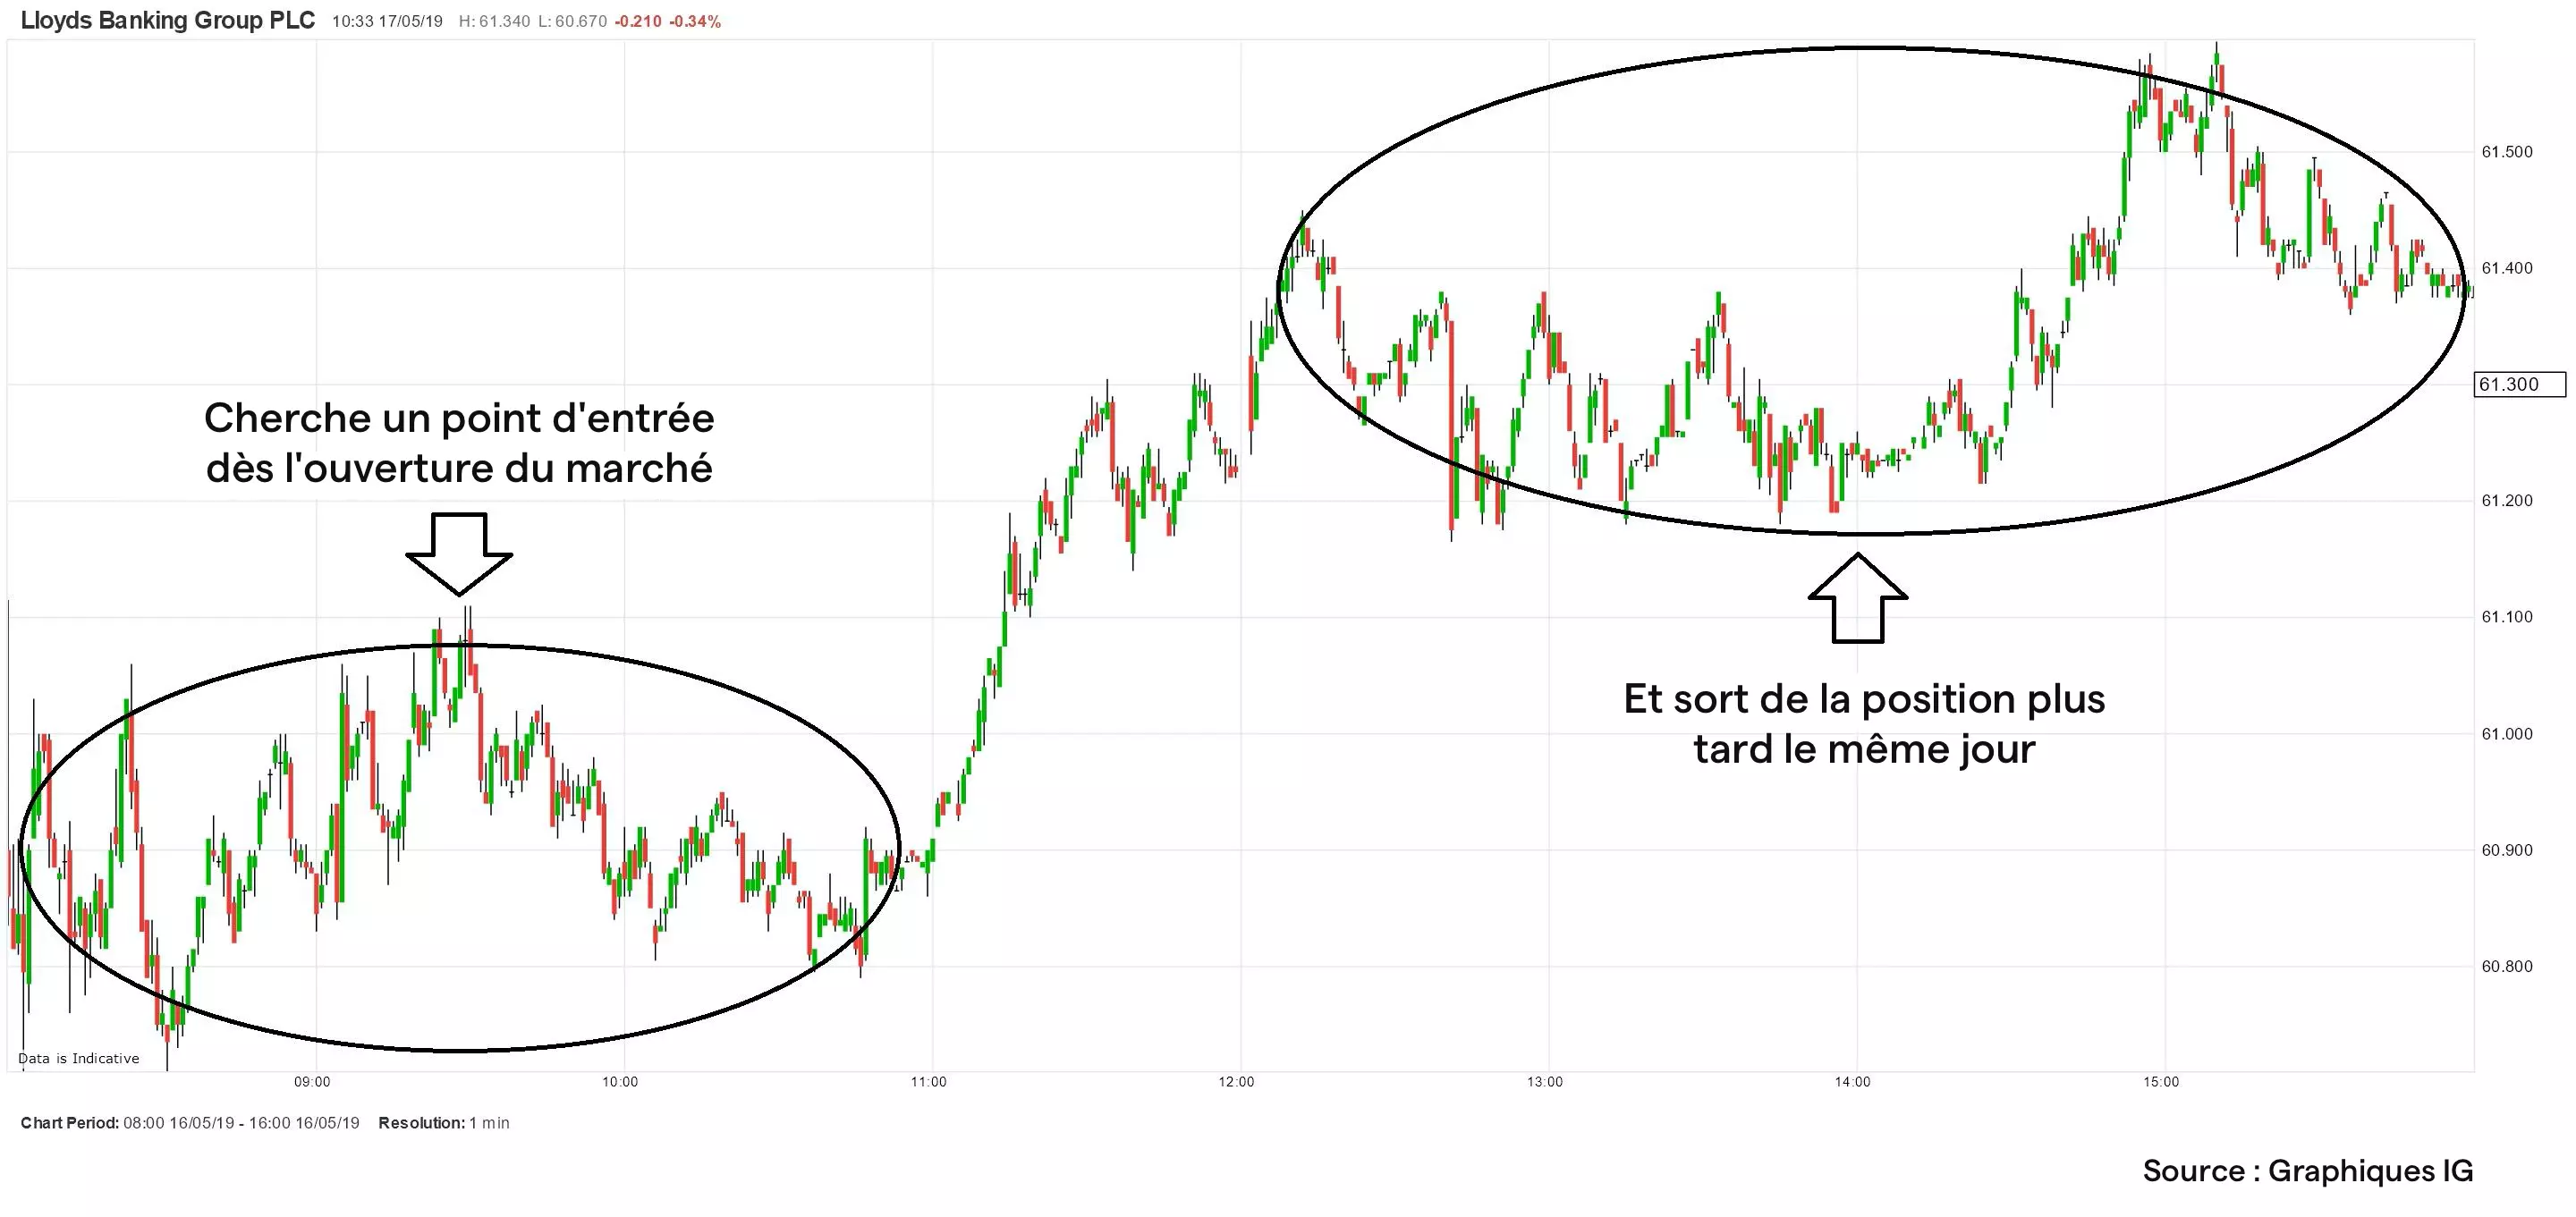 Lloyds day trading - graphique